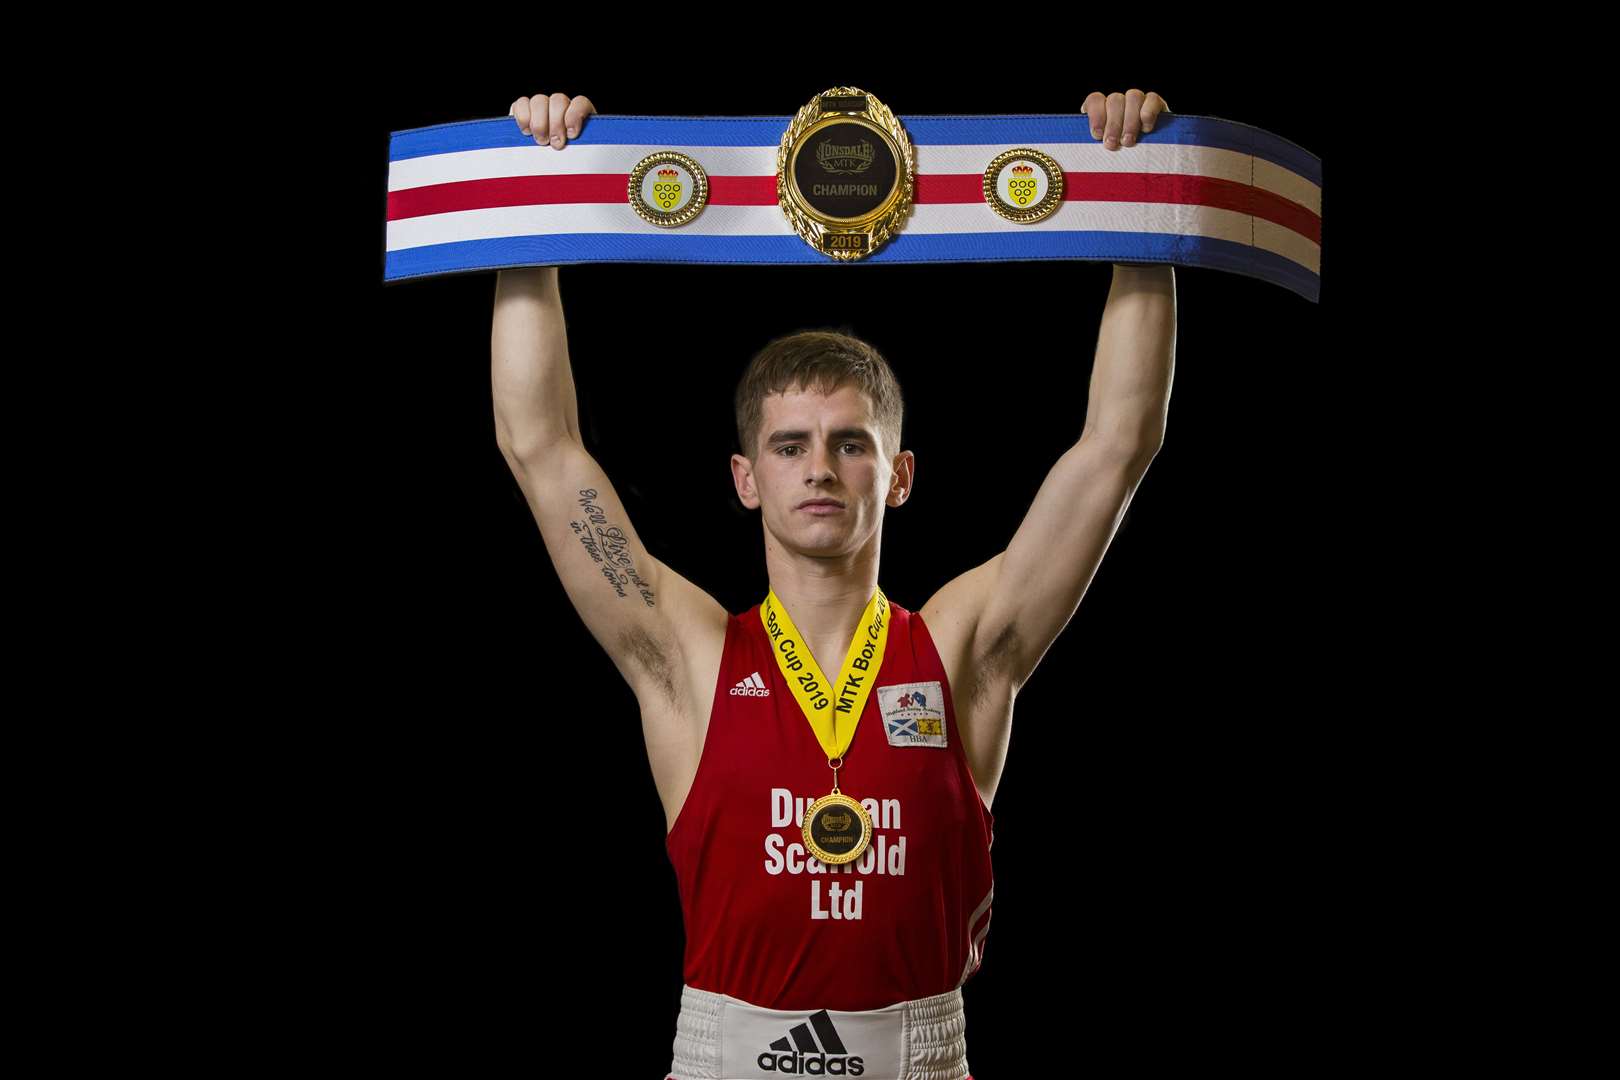 Highland Boxing Academy's John Duncan took the Lonsdale belt and a gold medal from the Lonsdale Box Cup. Picture: David Rothnie